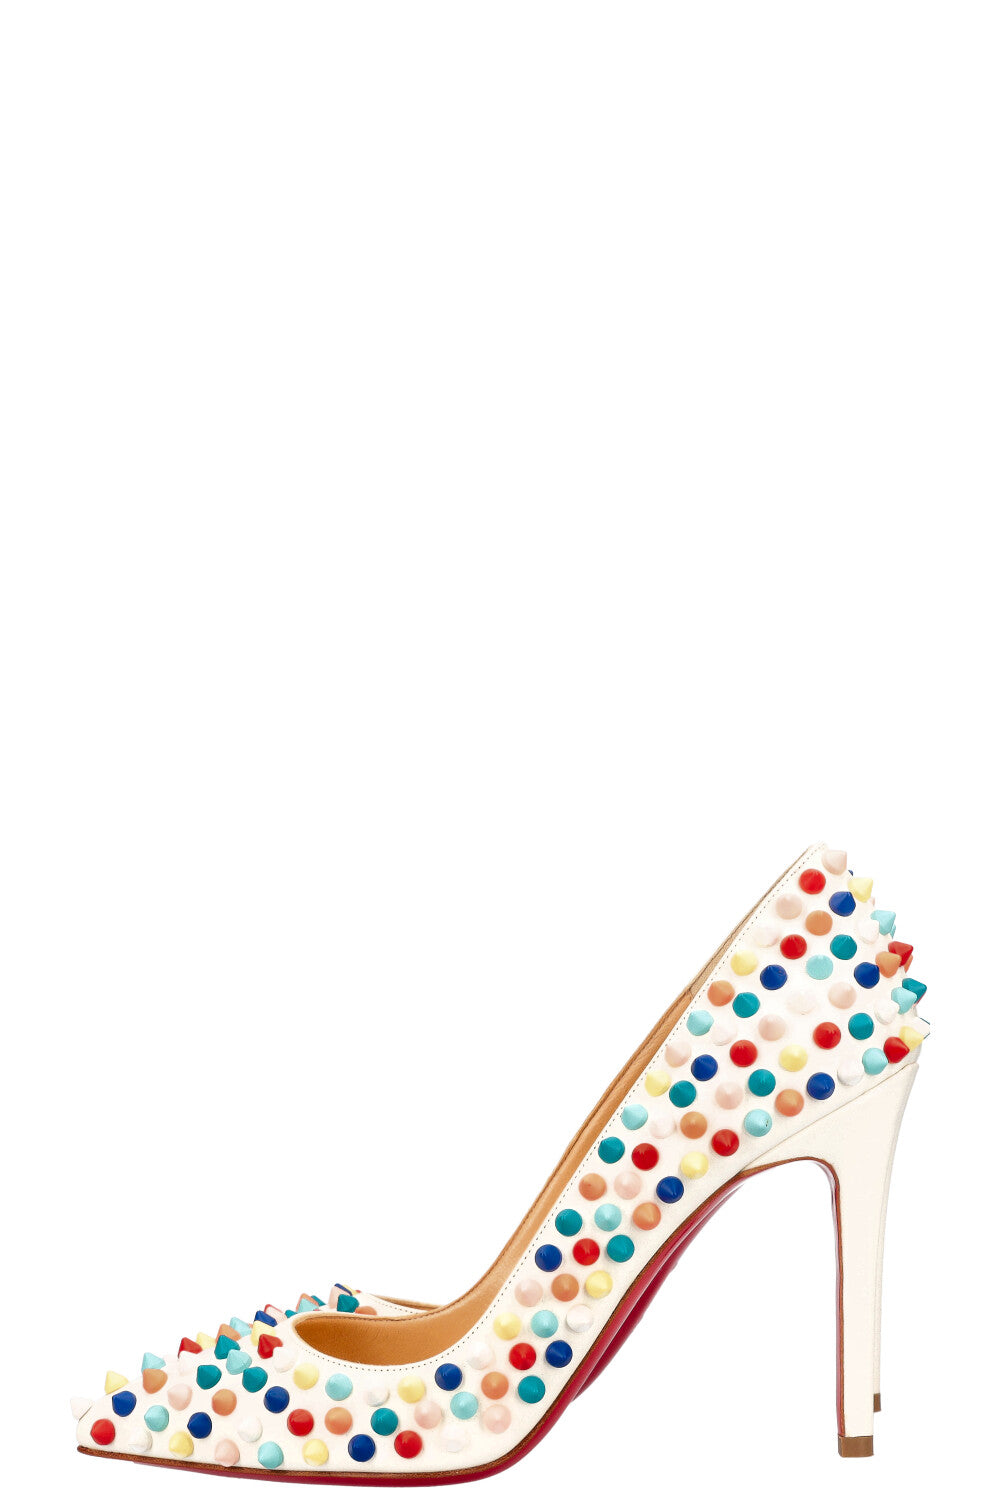 CHRISTIAN LOUBOUTIN Pigalle Spikes Multicolor